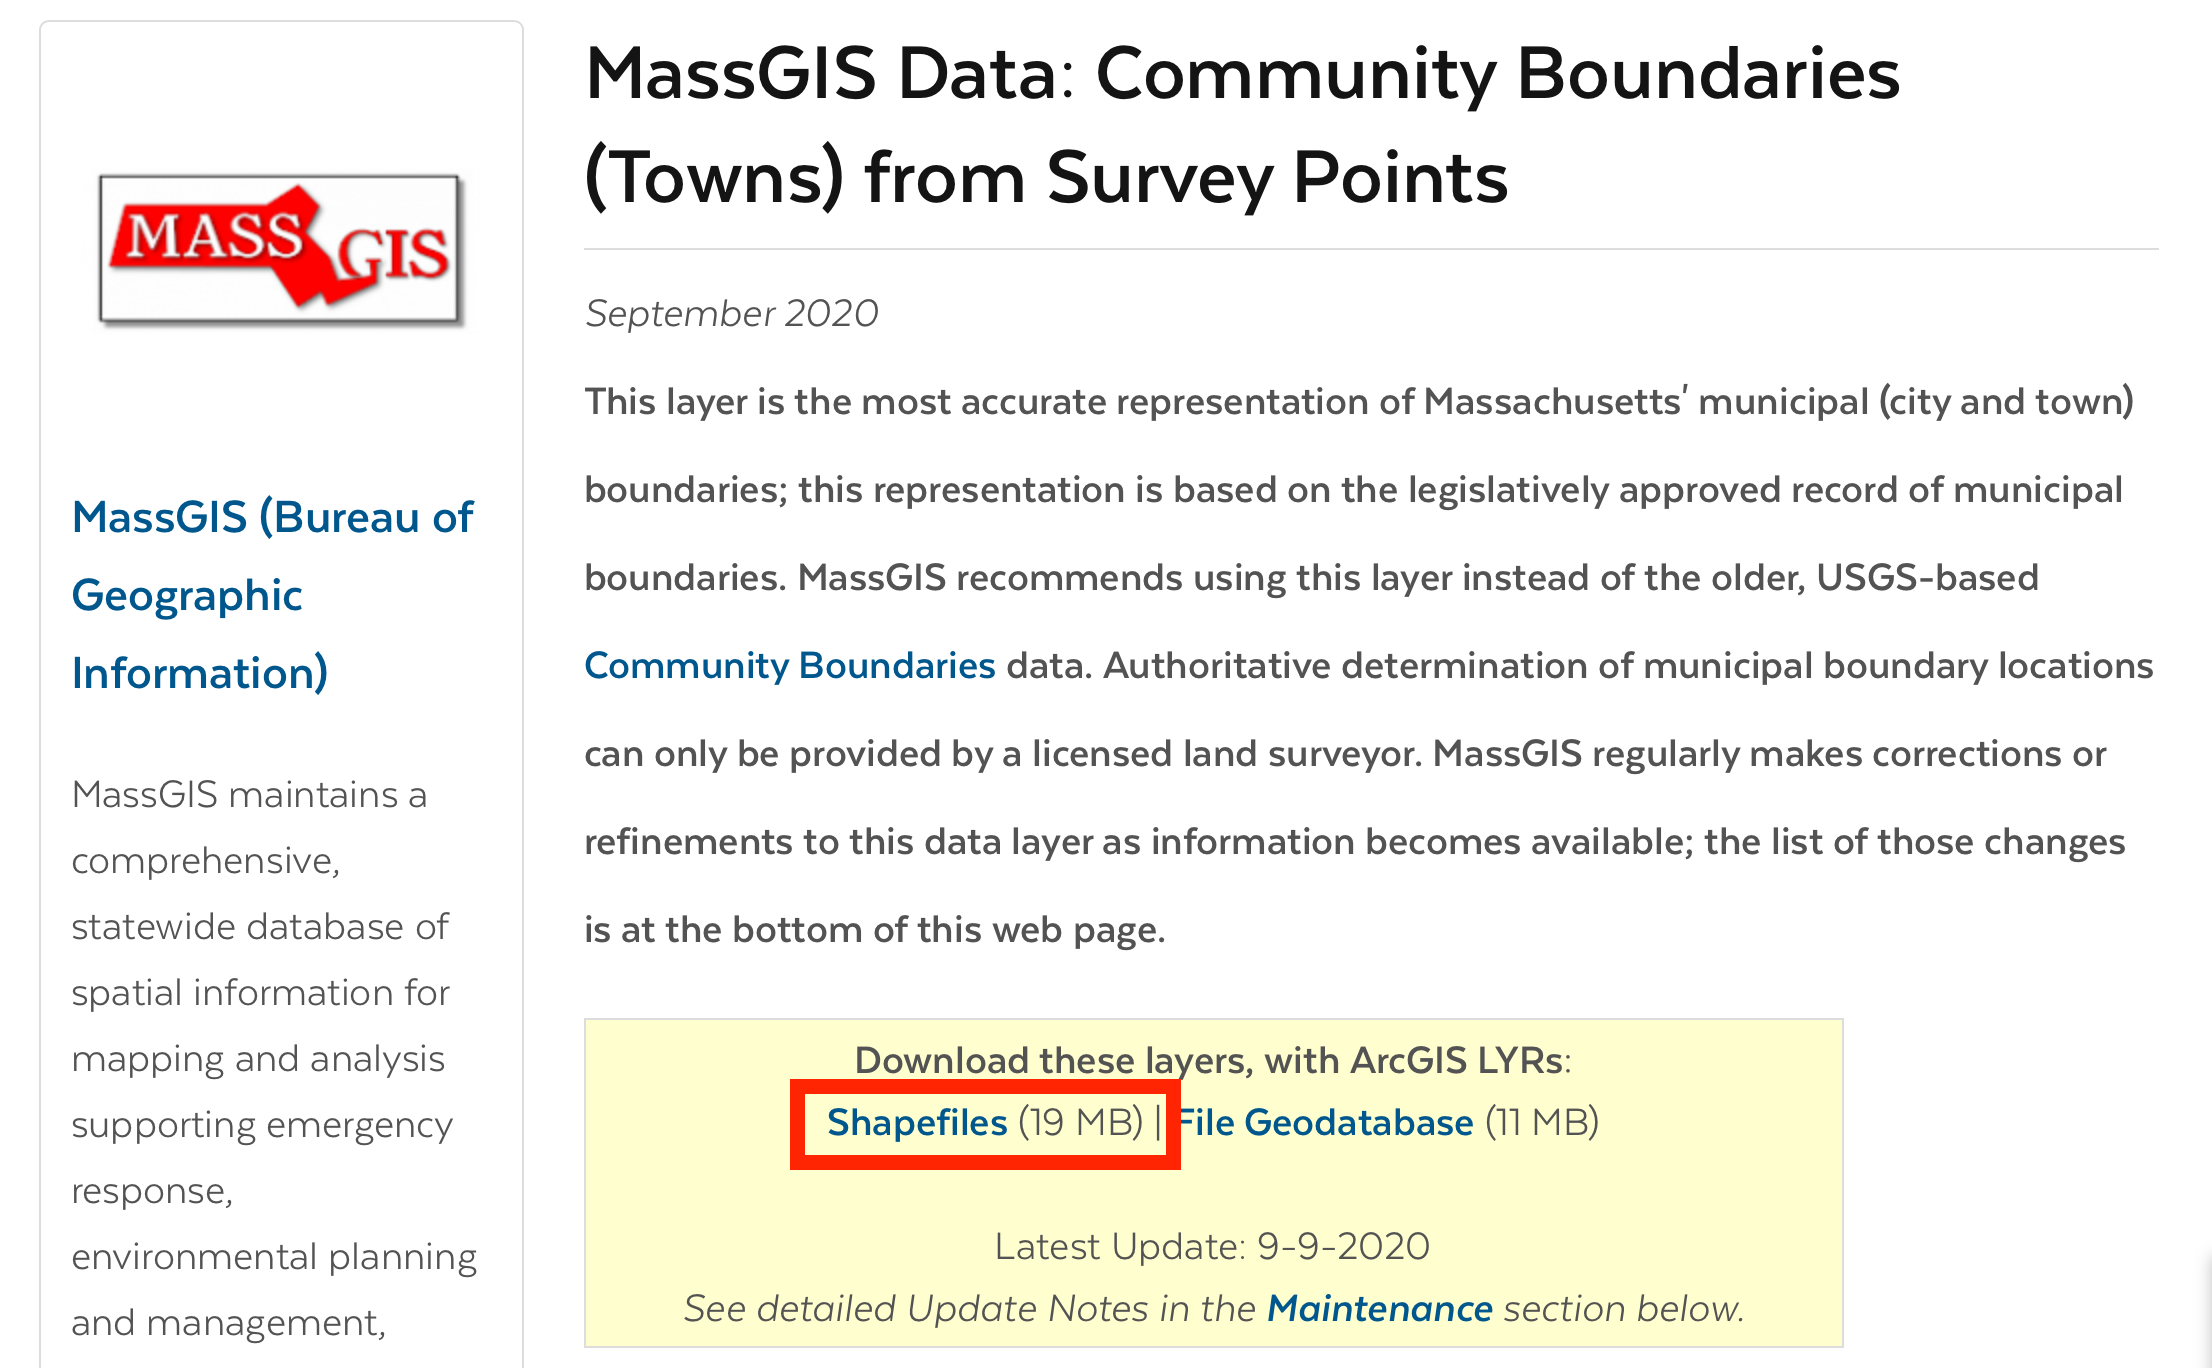 View of the MassGIS data portal, showing the button to download a shapefile of the town boundary layer